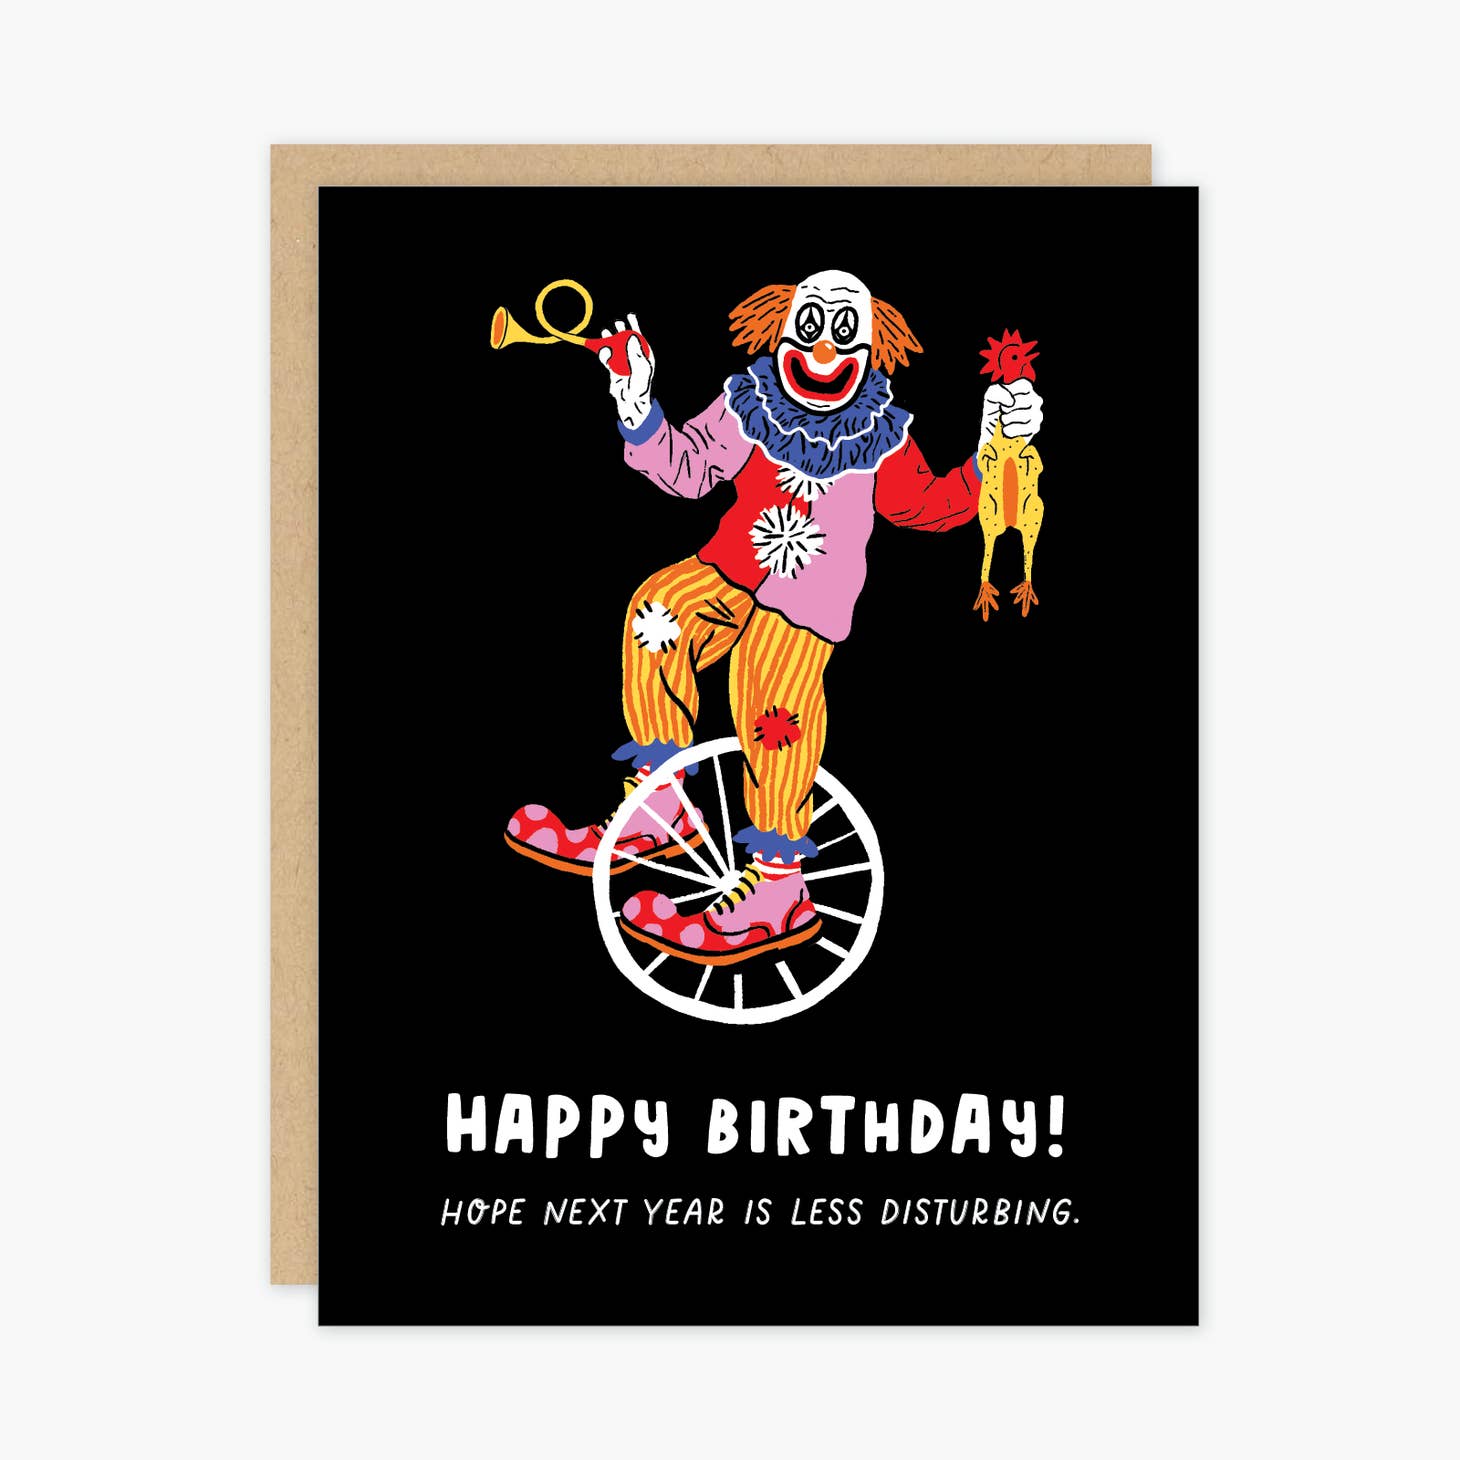 Black background with image of clown riding a unicycle holding a rubber chicken and a horn with white text says, "Happy Birthday! hope next year is less disturbing". Kraft envelope included. 